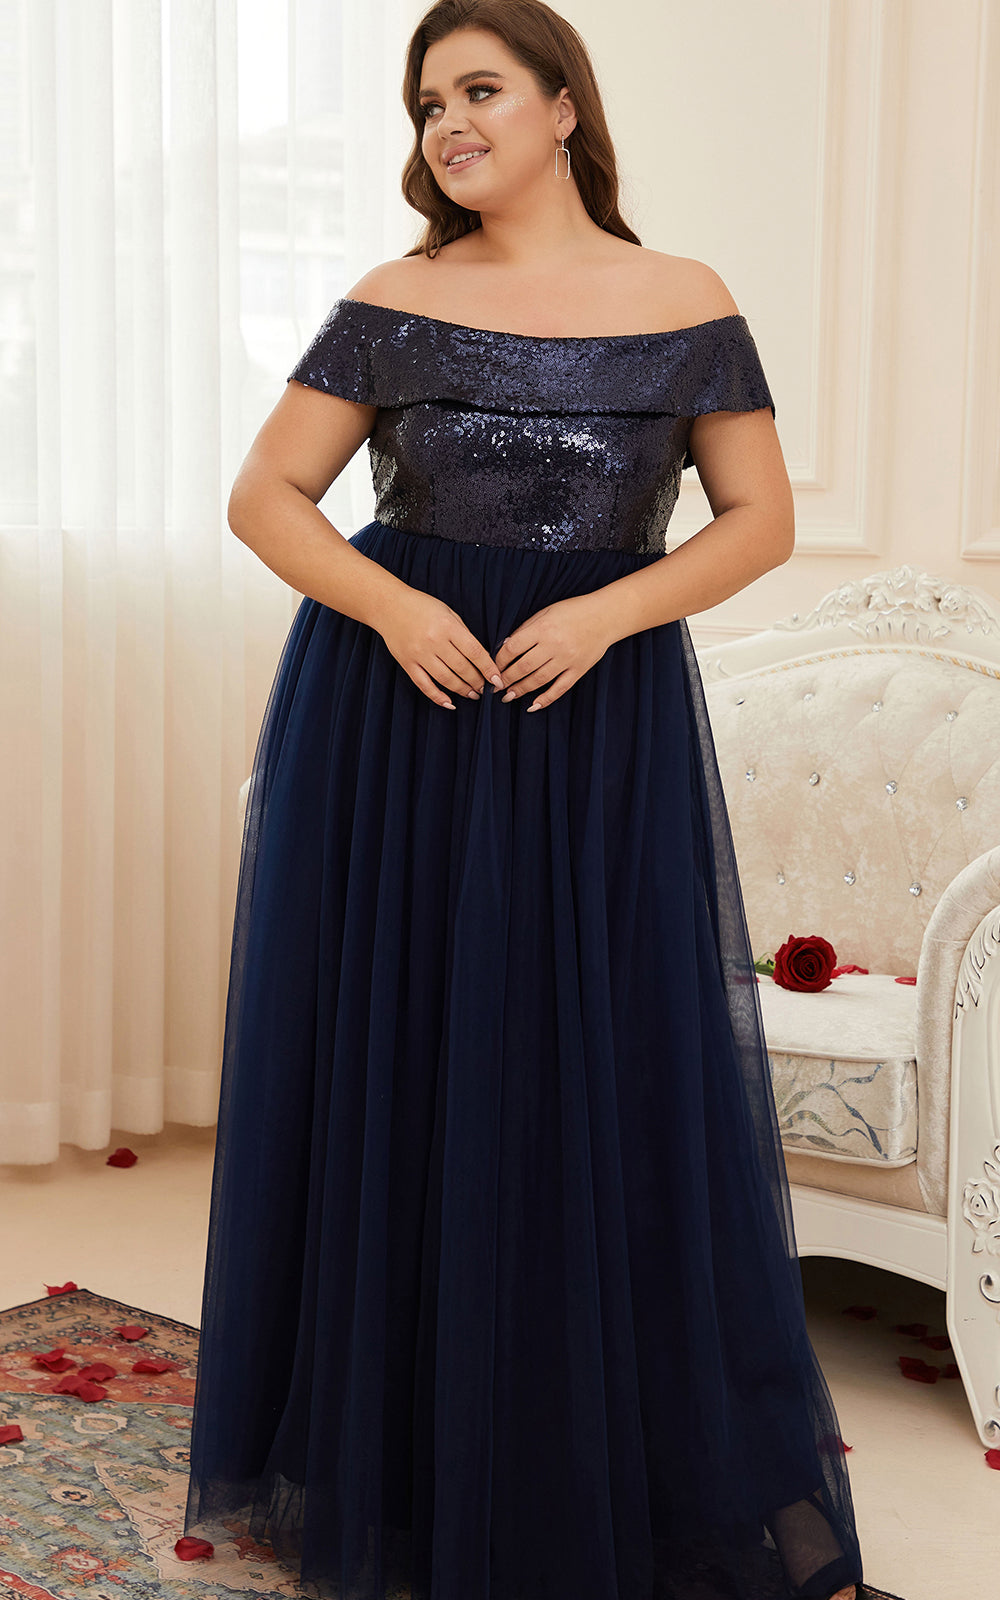 Plus Size Lady Sequin Tulle Formal Gowns Evening Bridesmaid Wedding Guest Dress Curve Prom Gowns Long Homecoming Graduation, Navy Blue, 1XL